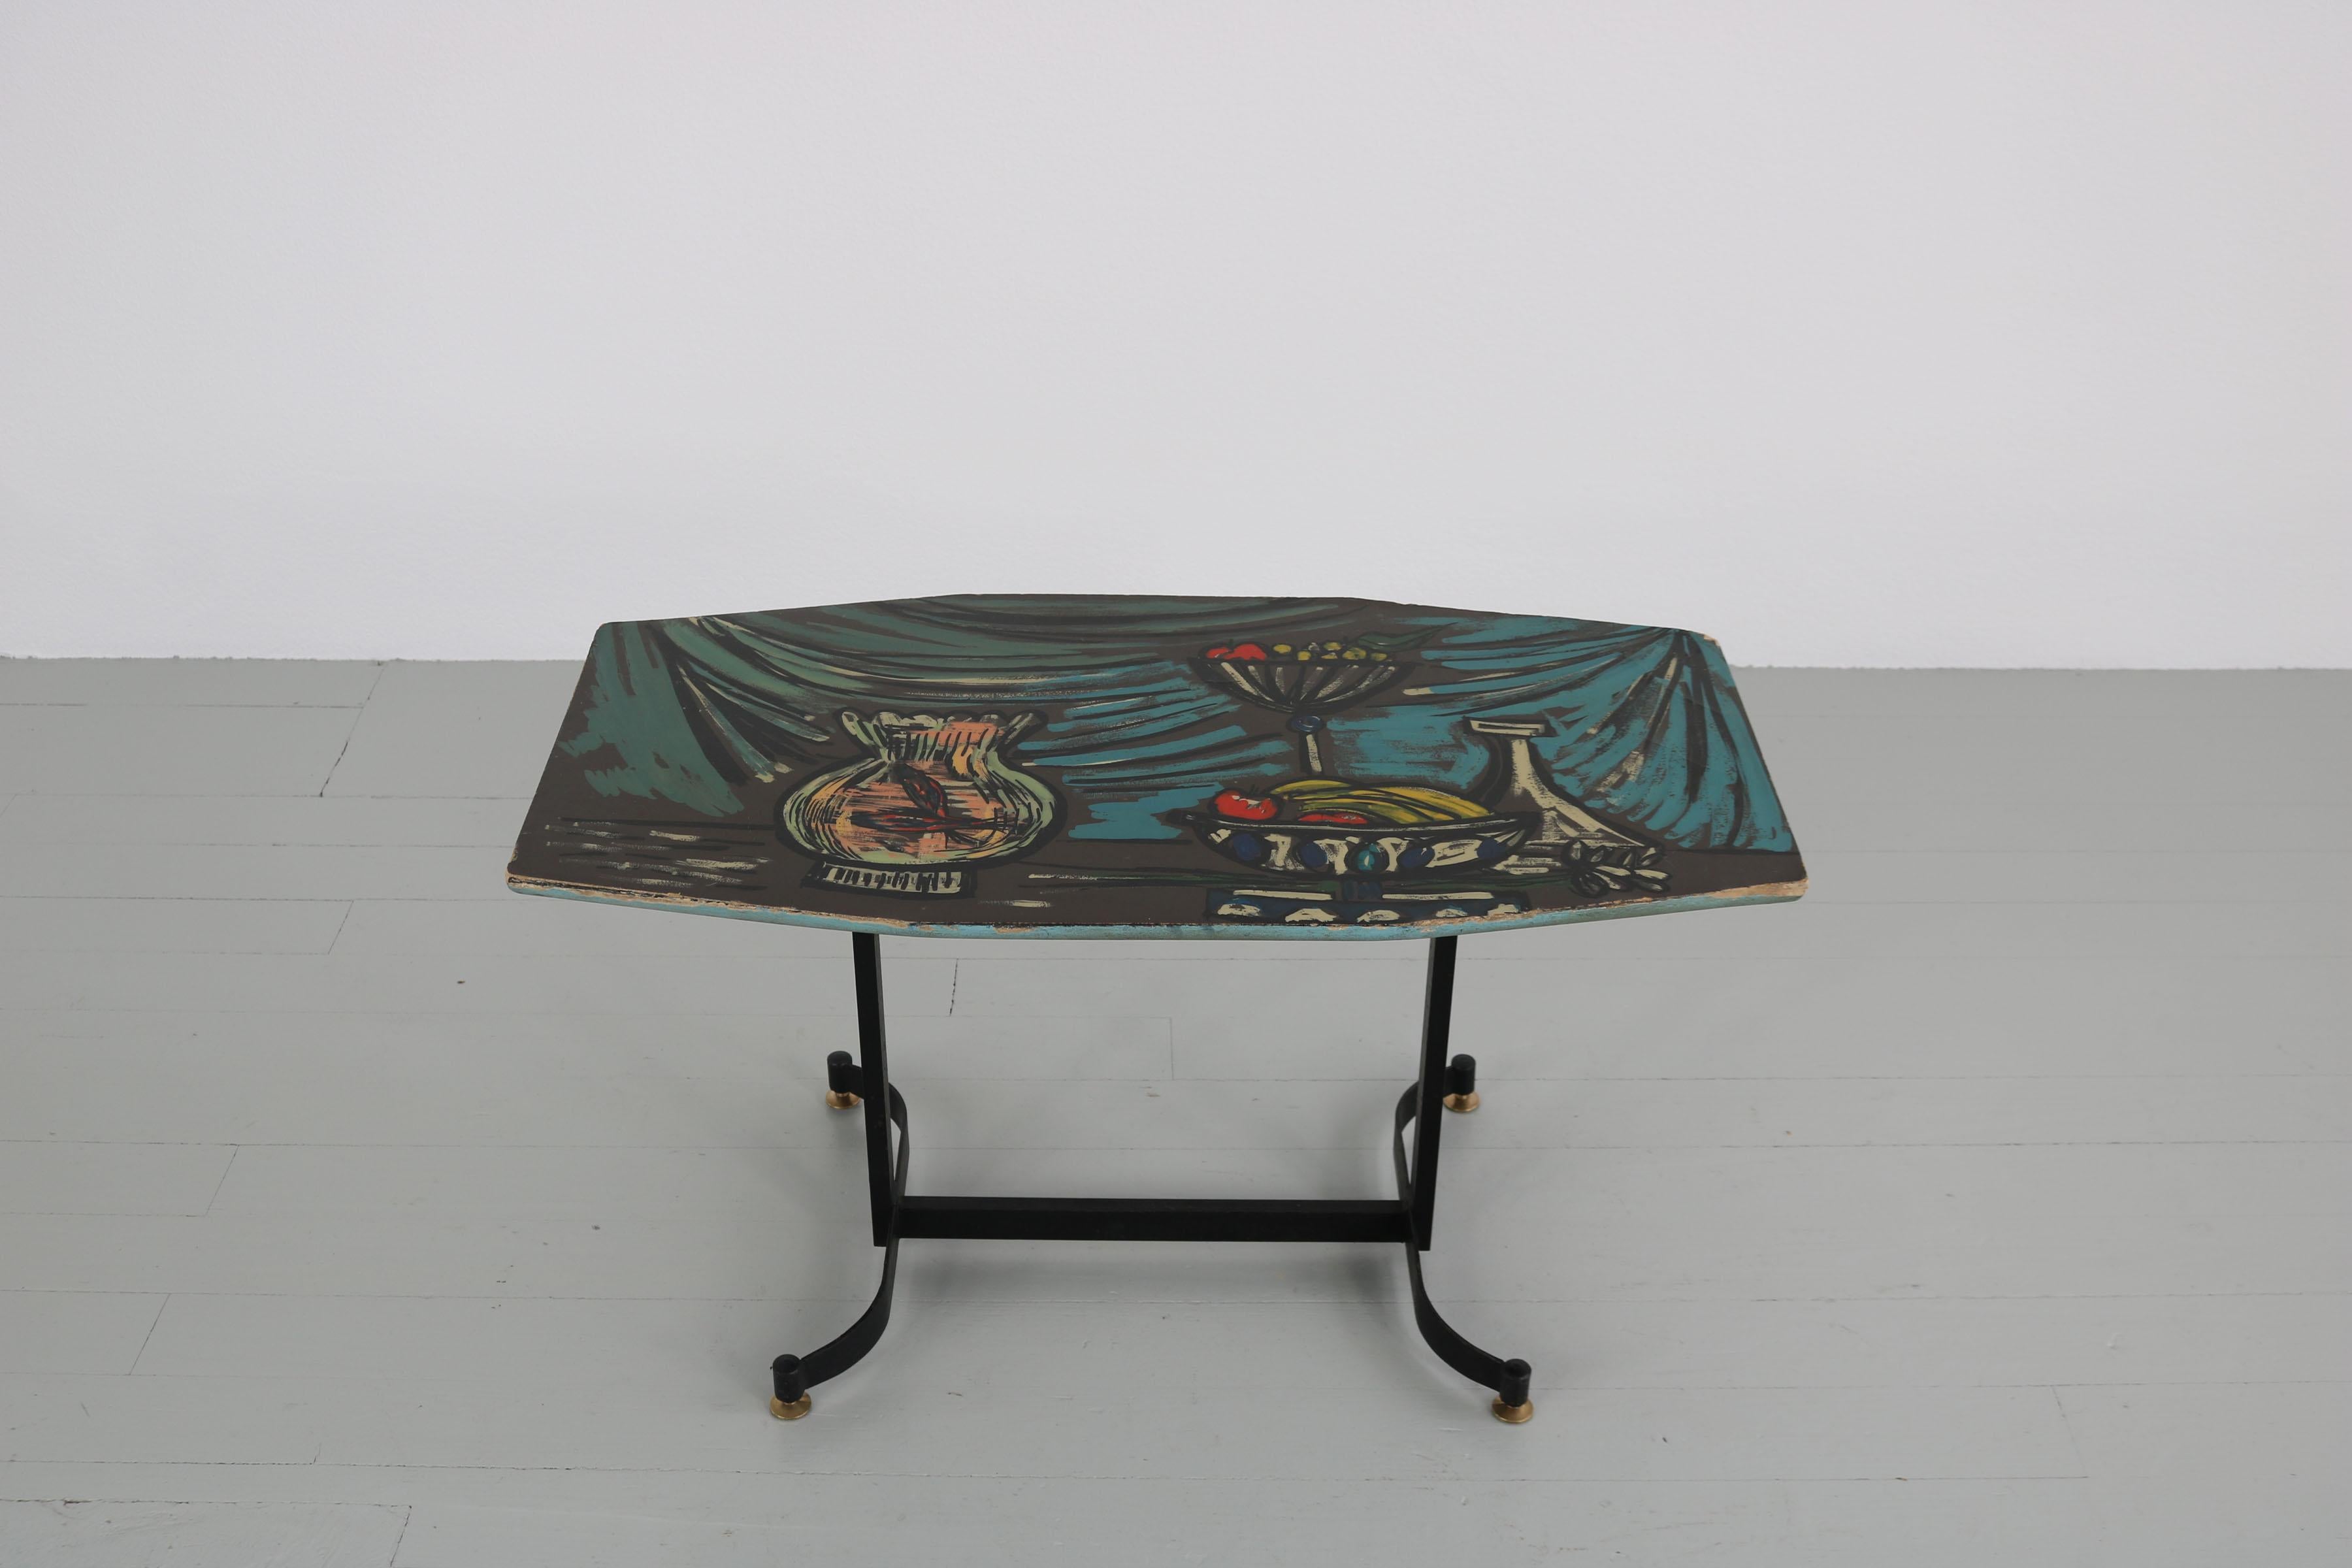 Italian Dark Sofa Table with Colorful Hand-Painted Motives on Table Top, 1950s For Sale 9